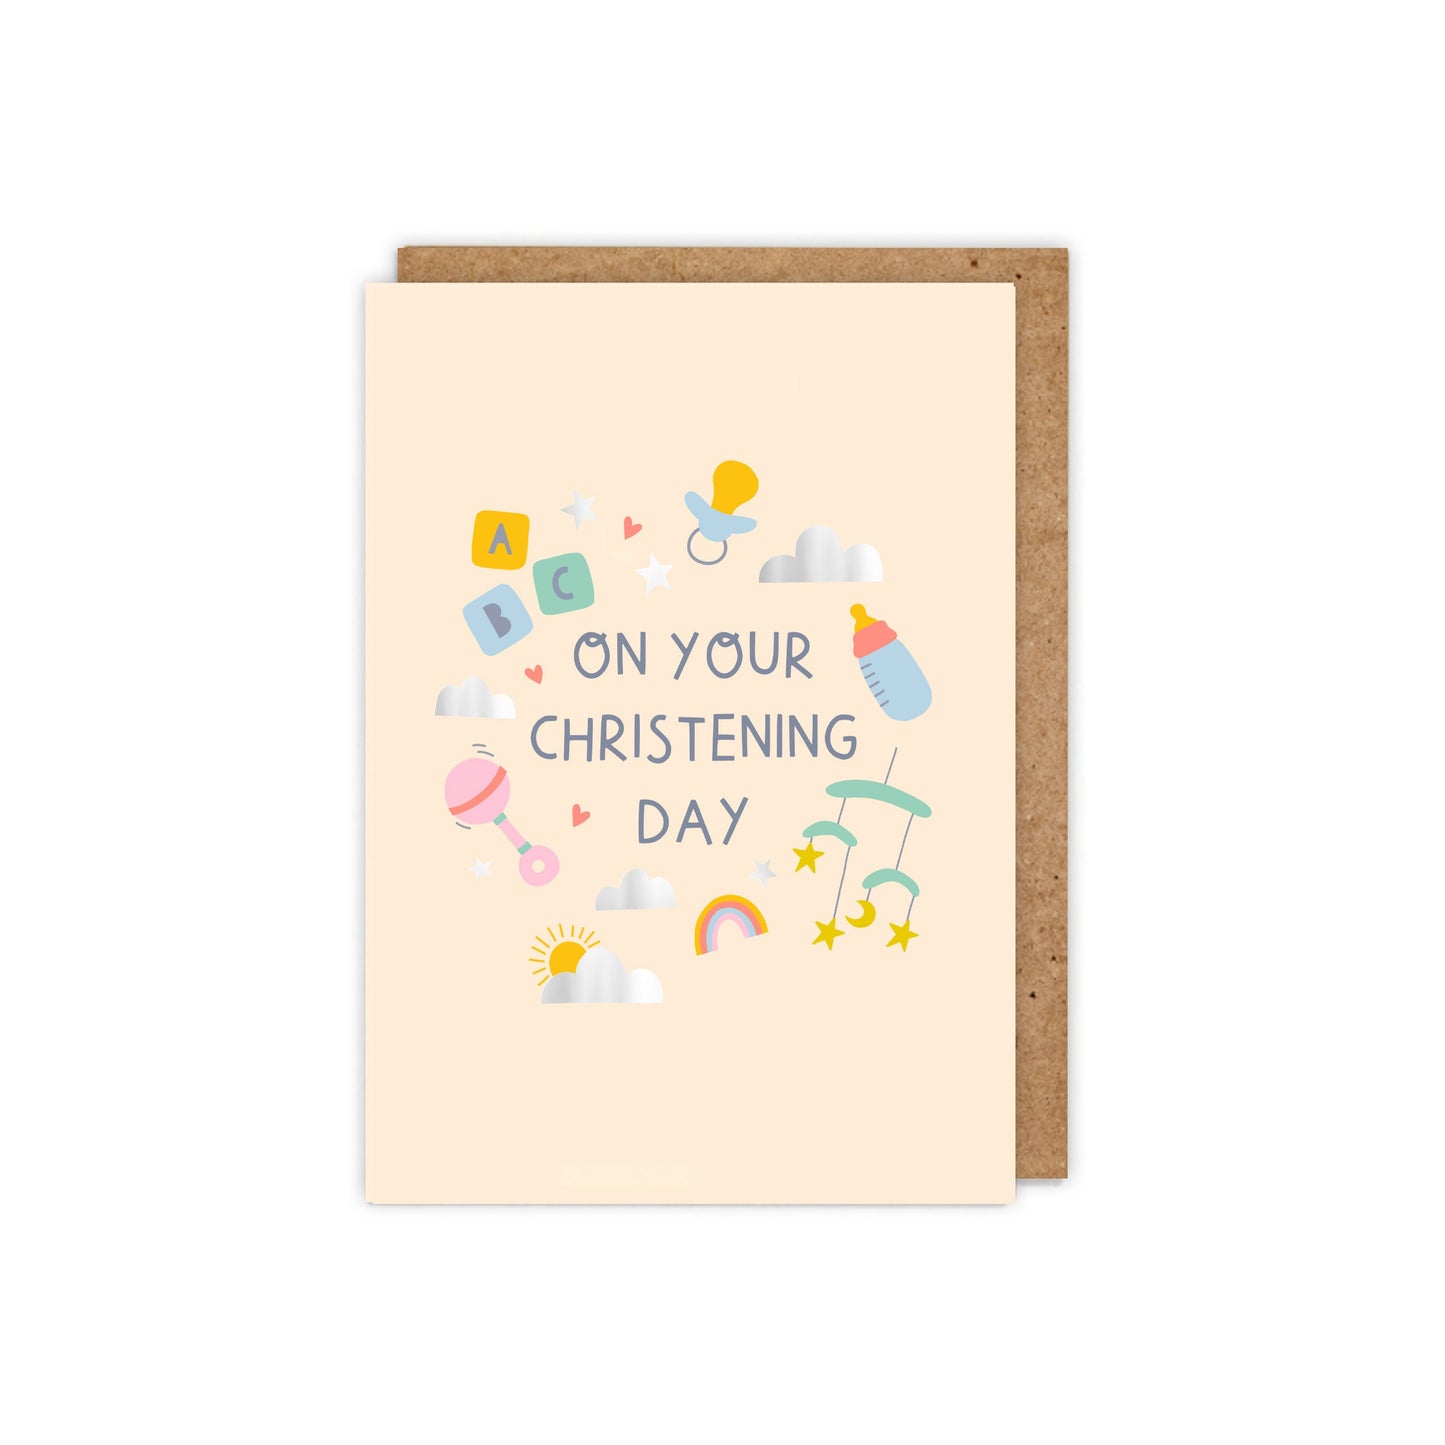 On your Christening Day Silver Foiled Card